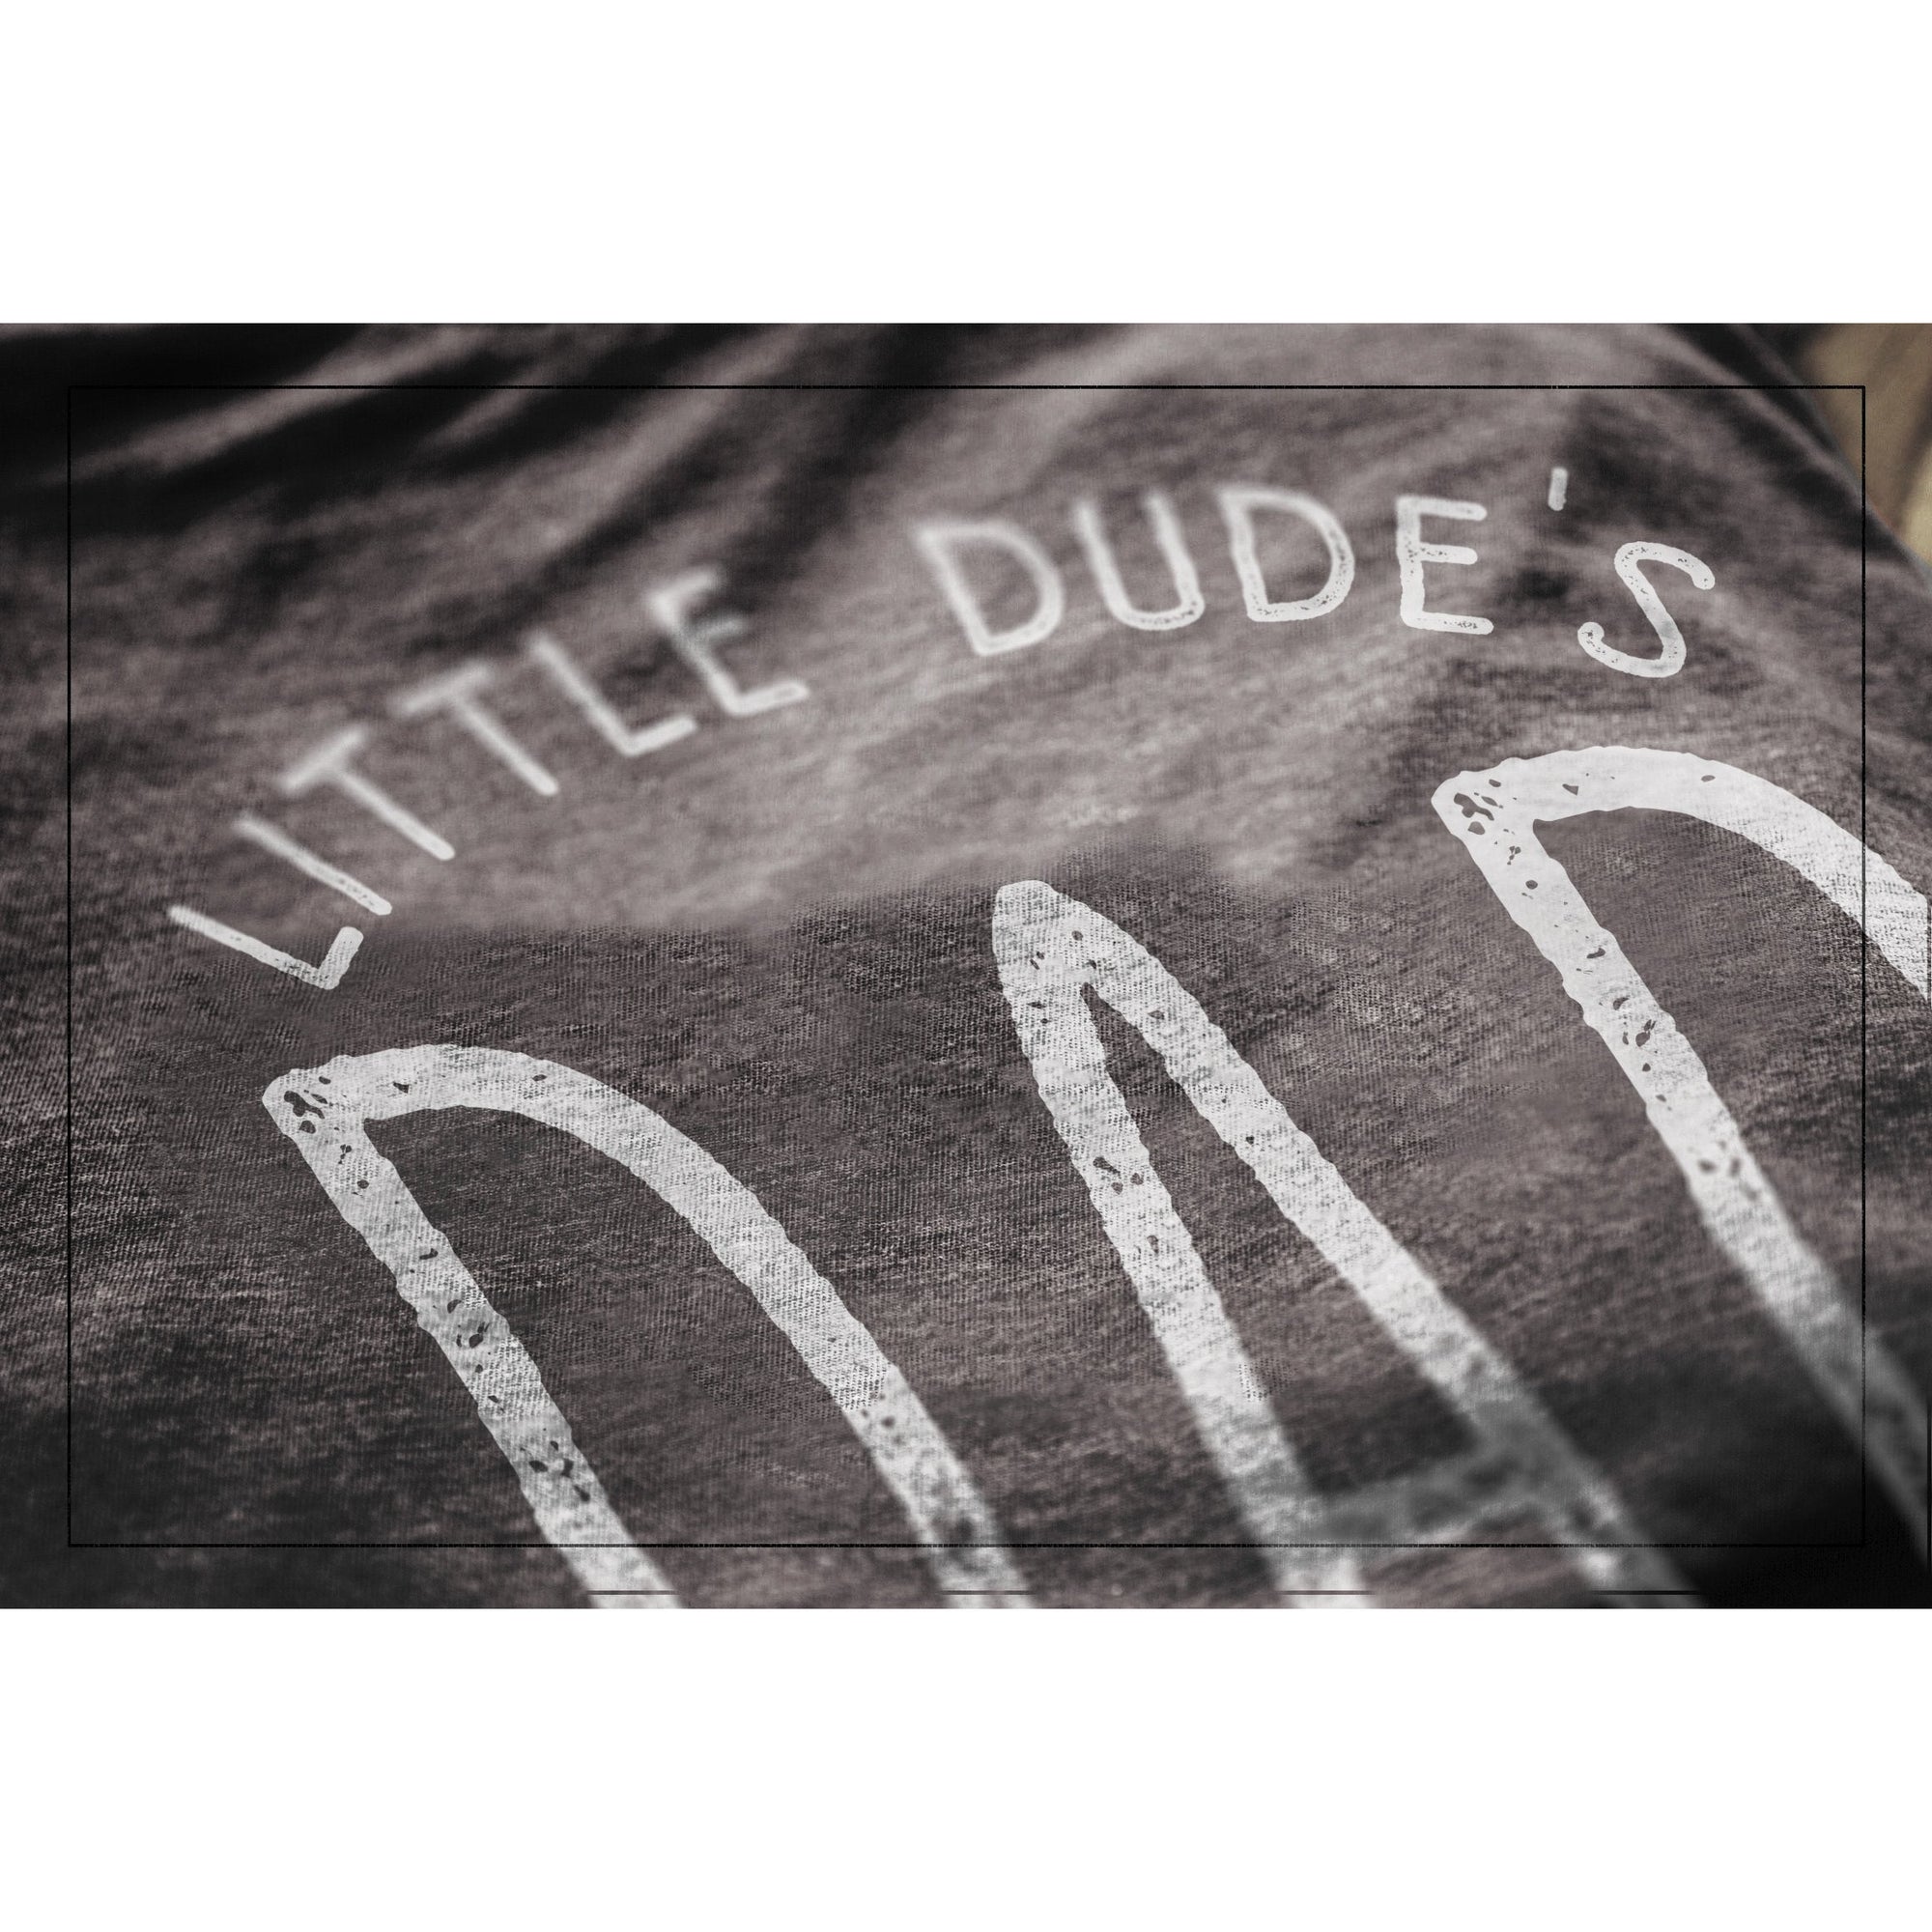 Lil Dude's Dad Charcoal Printed Graphic Men's Crew T-Shirt Tee Closeup Details